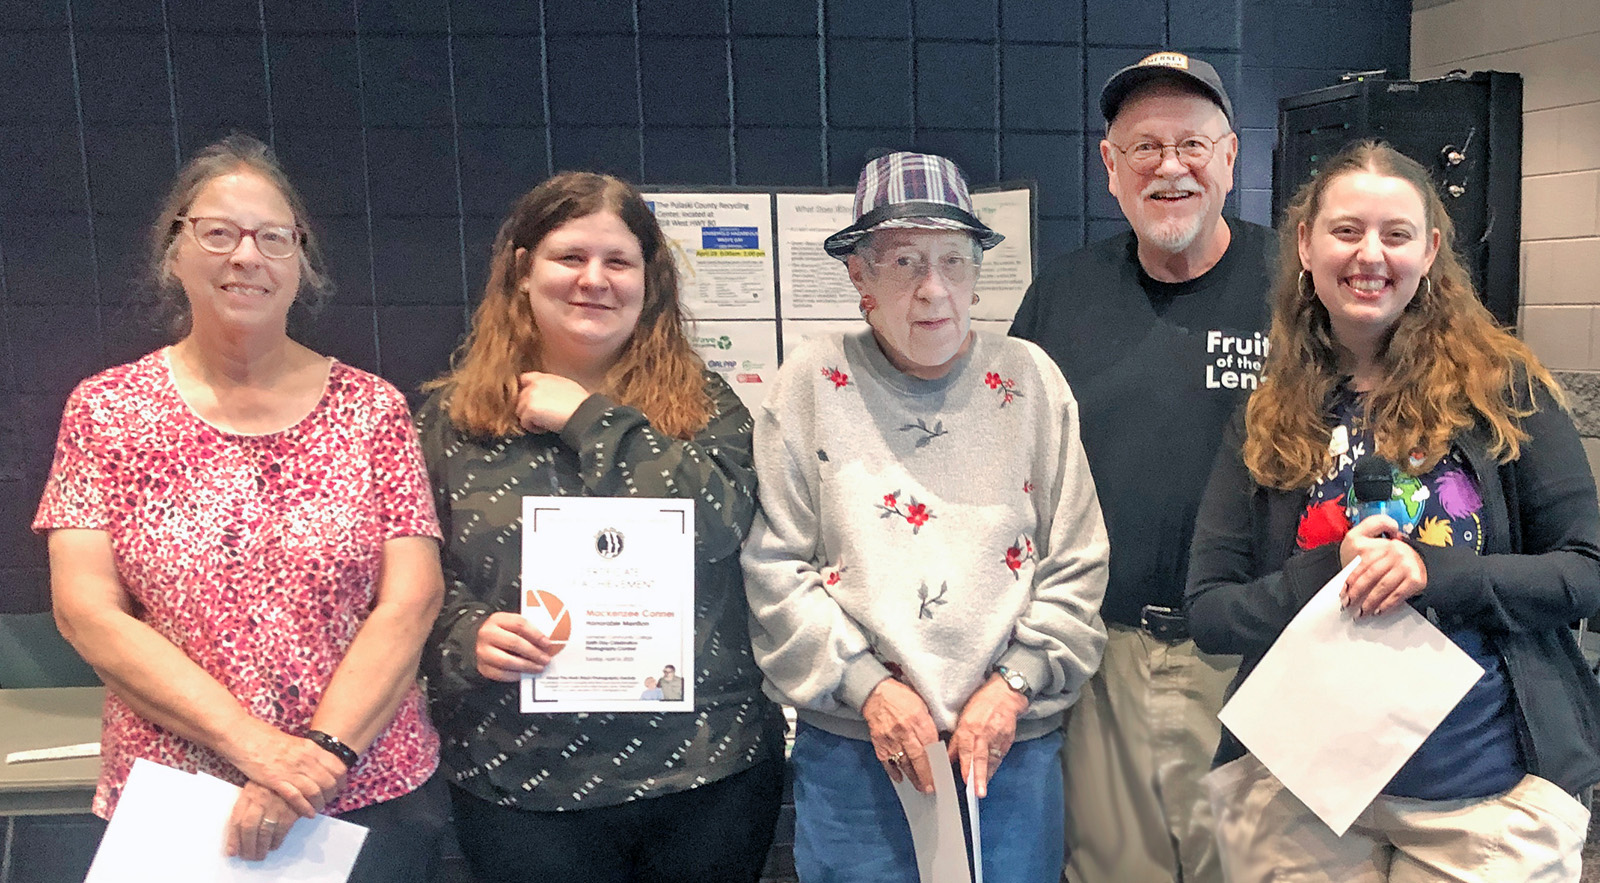 Peggy Yaeger of Corbin, left, took home first place honors and $100 in cash in Fruit of the Lens photography club’s Nash Black Photography Award competition. The Somerset Community College club recognized winners during its Earth Day Celebration on April 16. Also pictured are, from second left, honorable mention winner Mackenzee Conner of Somerset, award sponsor Irene Black, faculty advisor Stuart Simpson, and SCC student and club president Laurie Abbott.